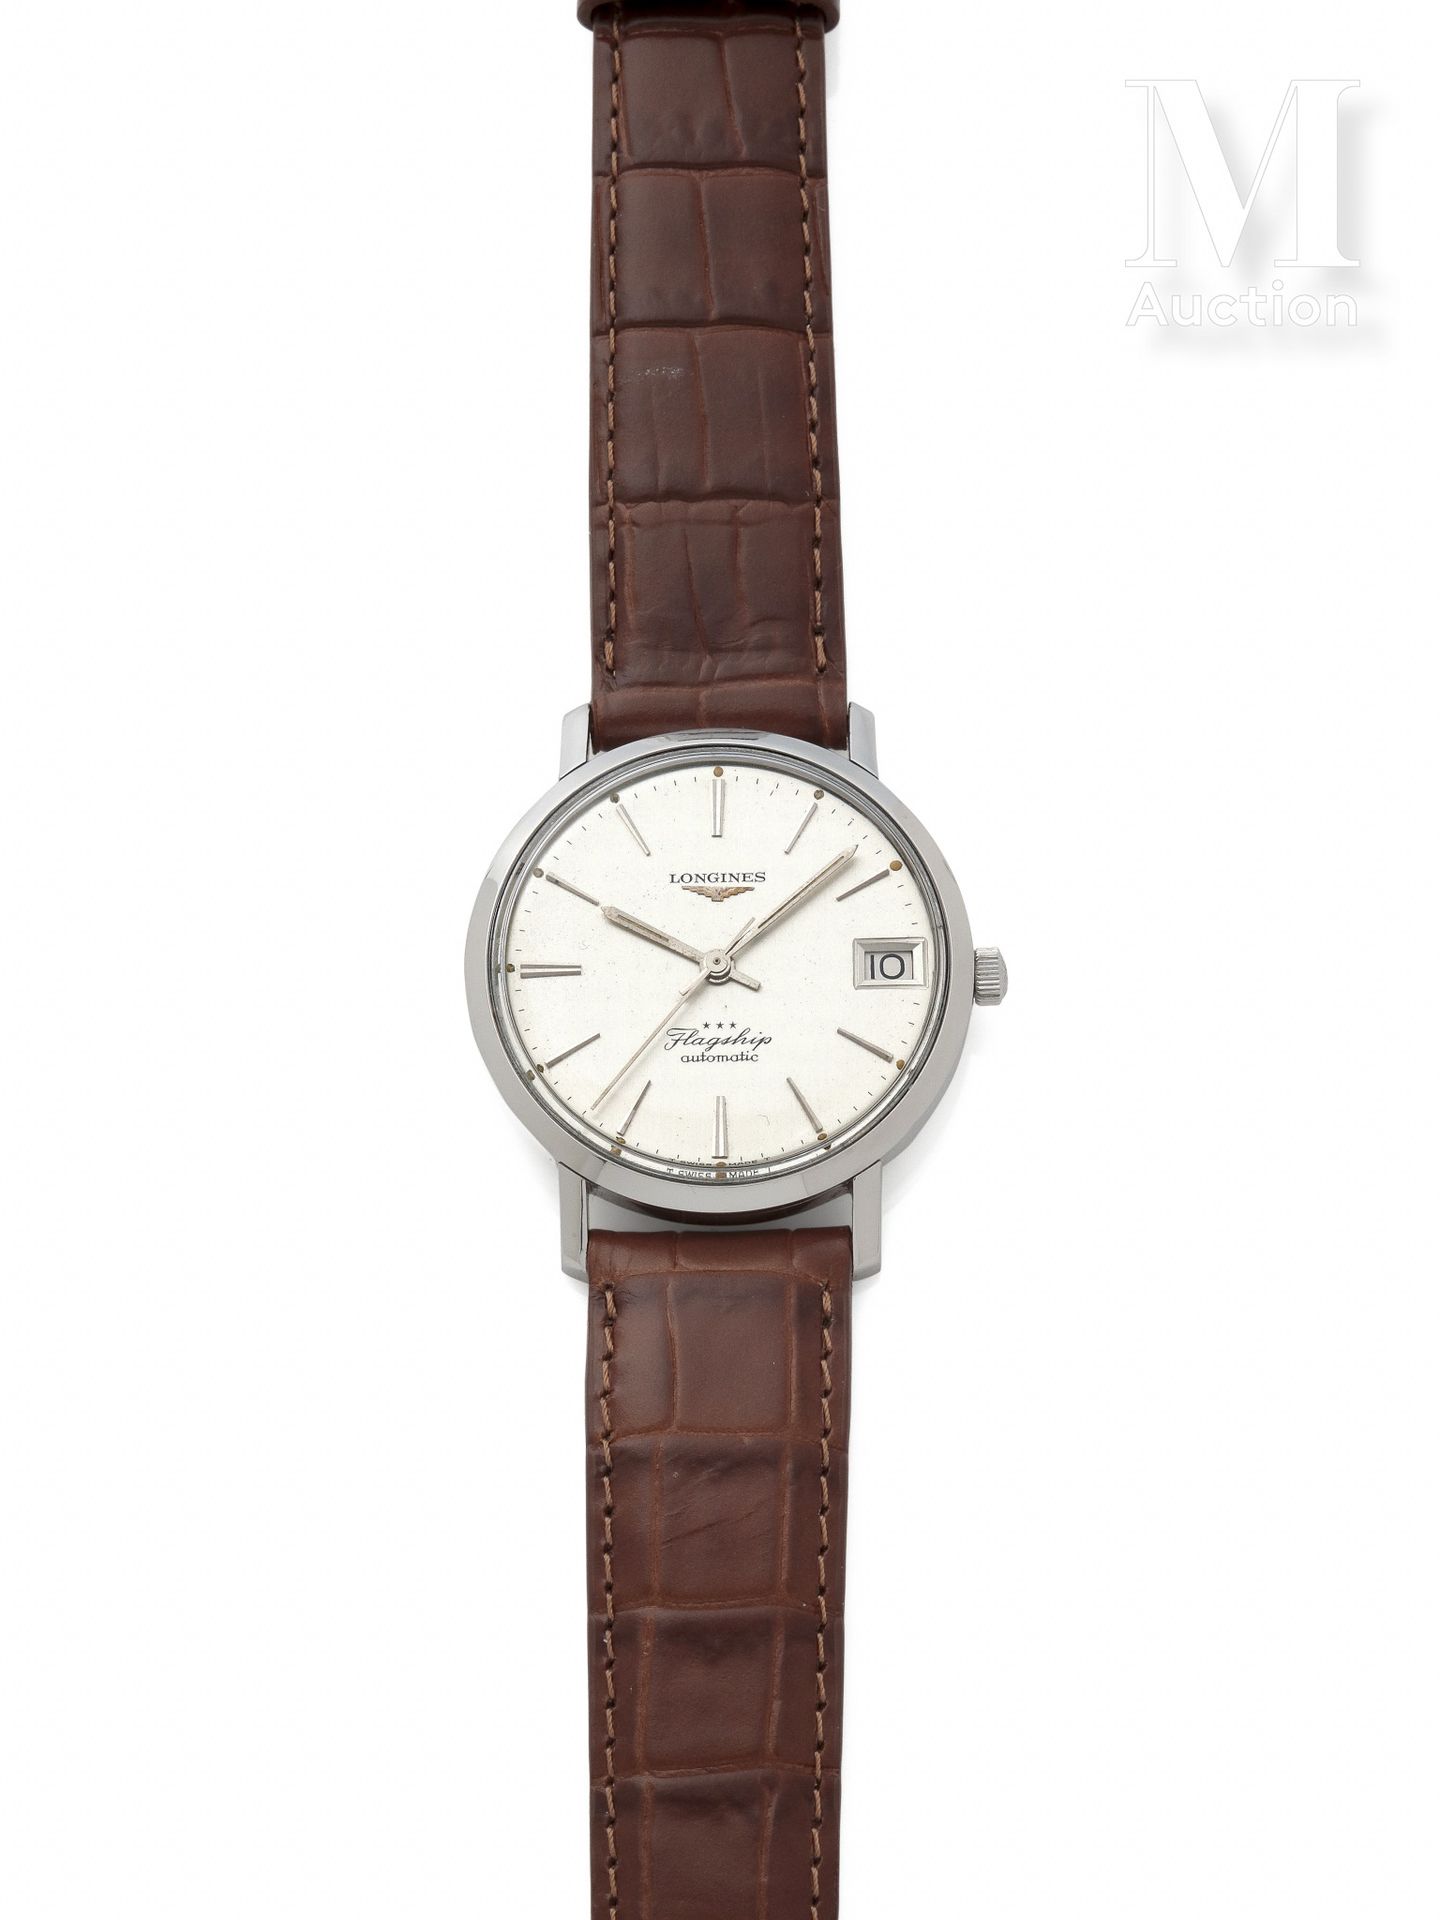 LONGINES Flagship

Catalogue number: 3118 

Circa 1970

Men's round watch in ste&hellip;